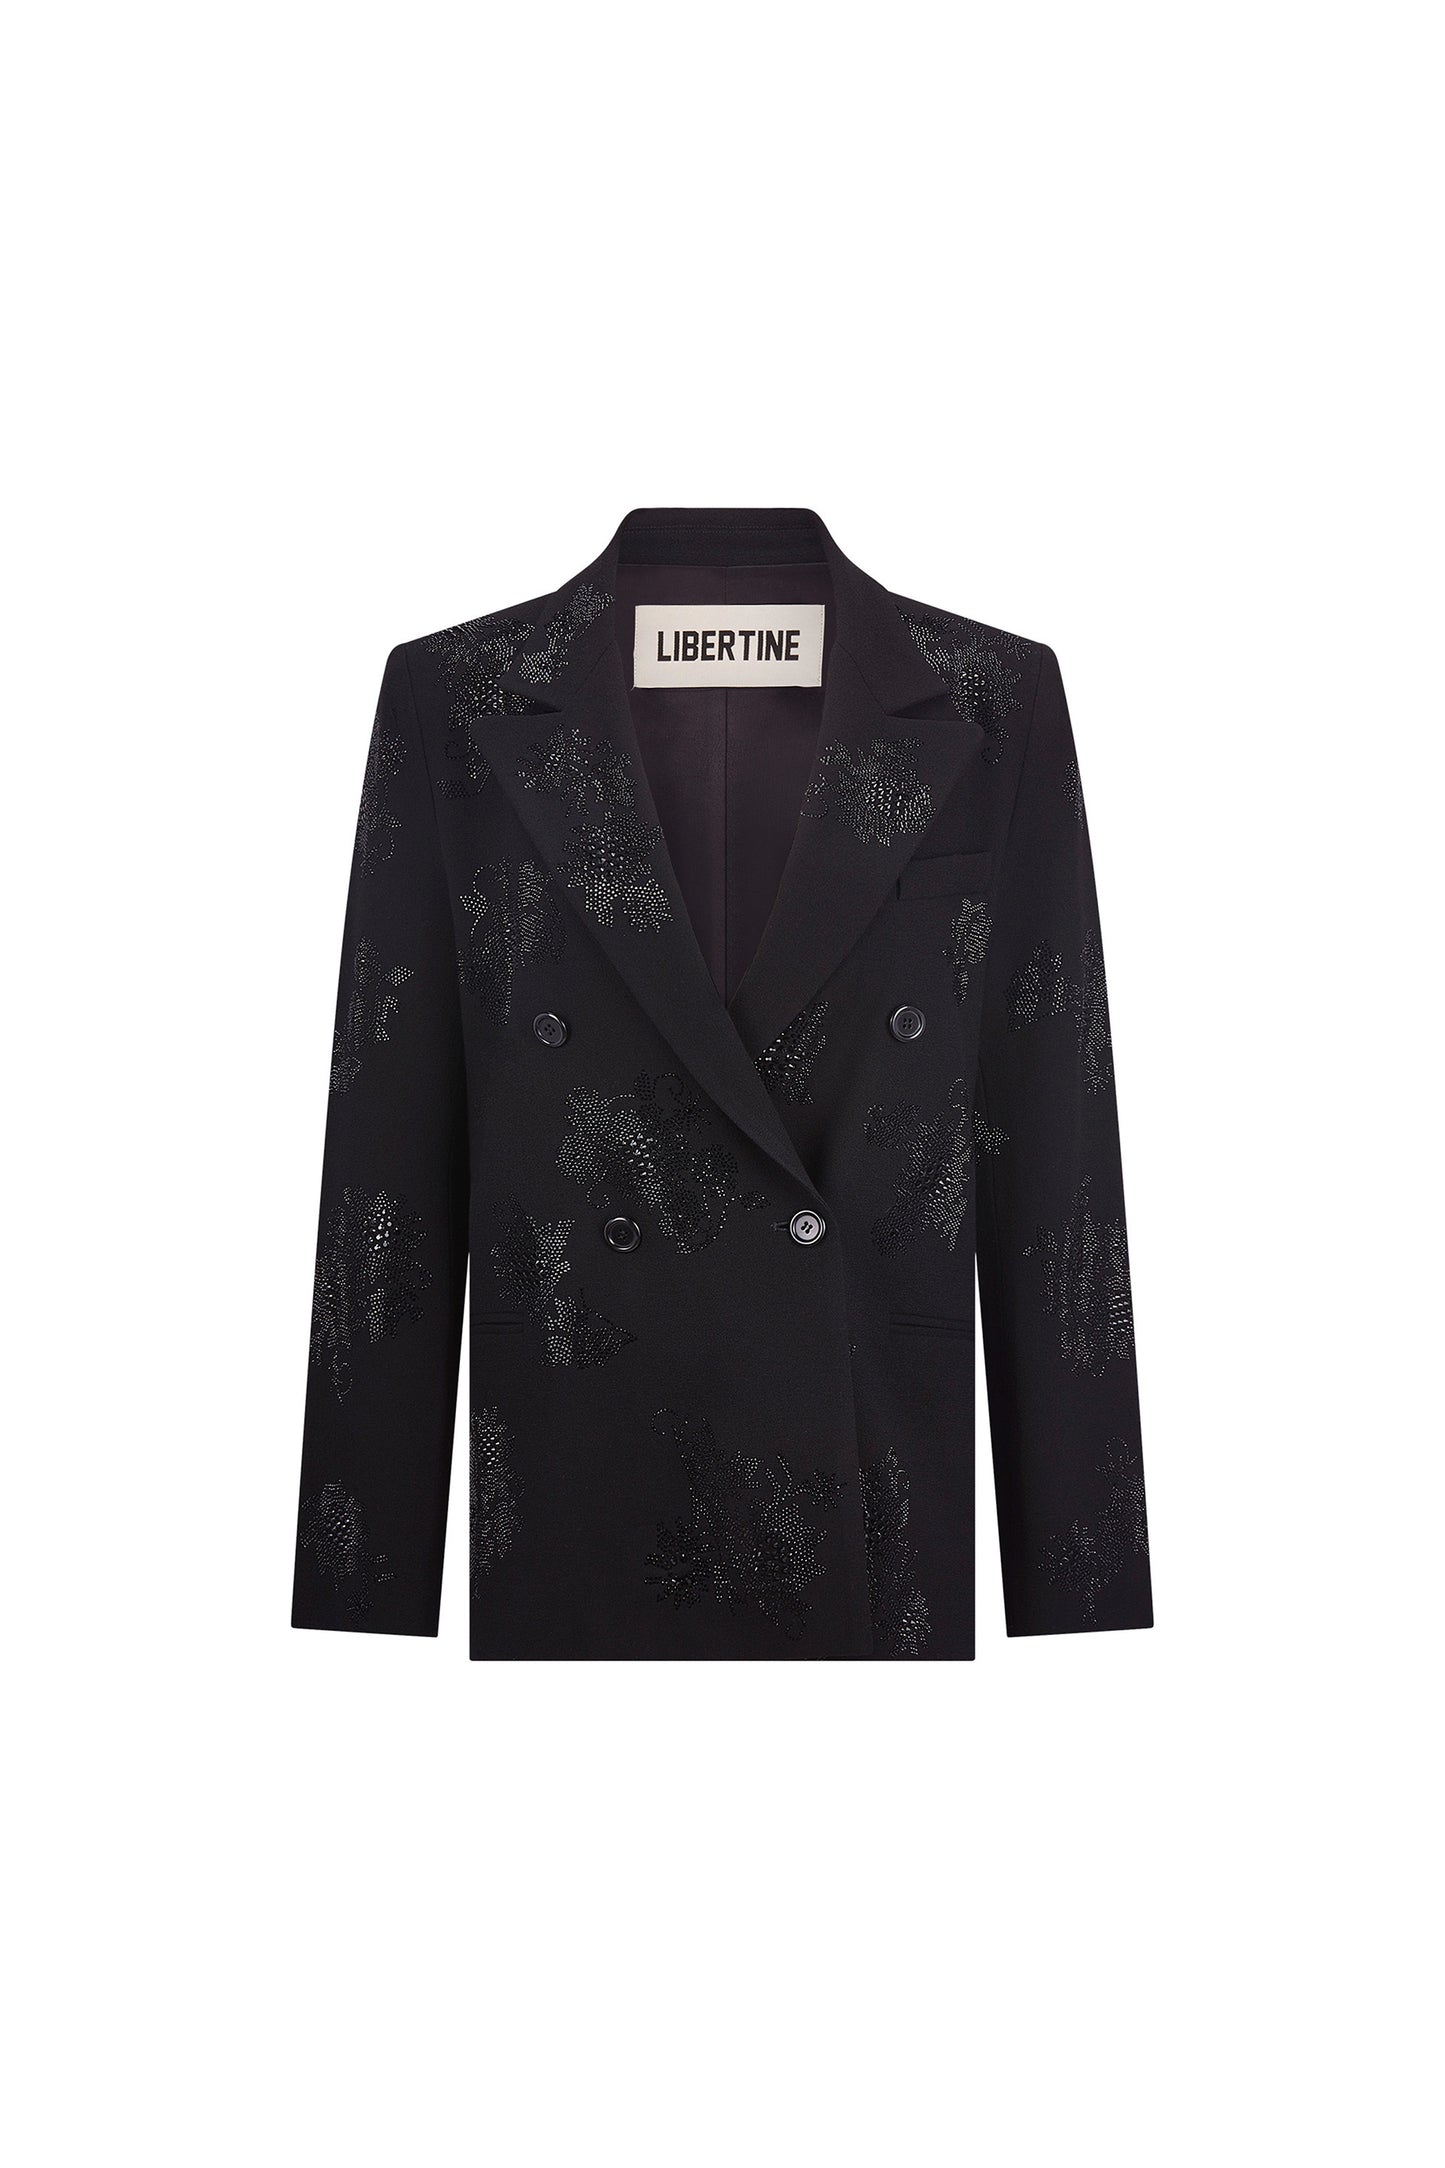 'GOTHIC GARDEN' DOUBLE BREASTED JACKET -  - Libertine